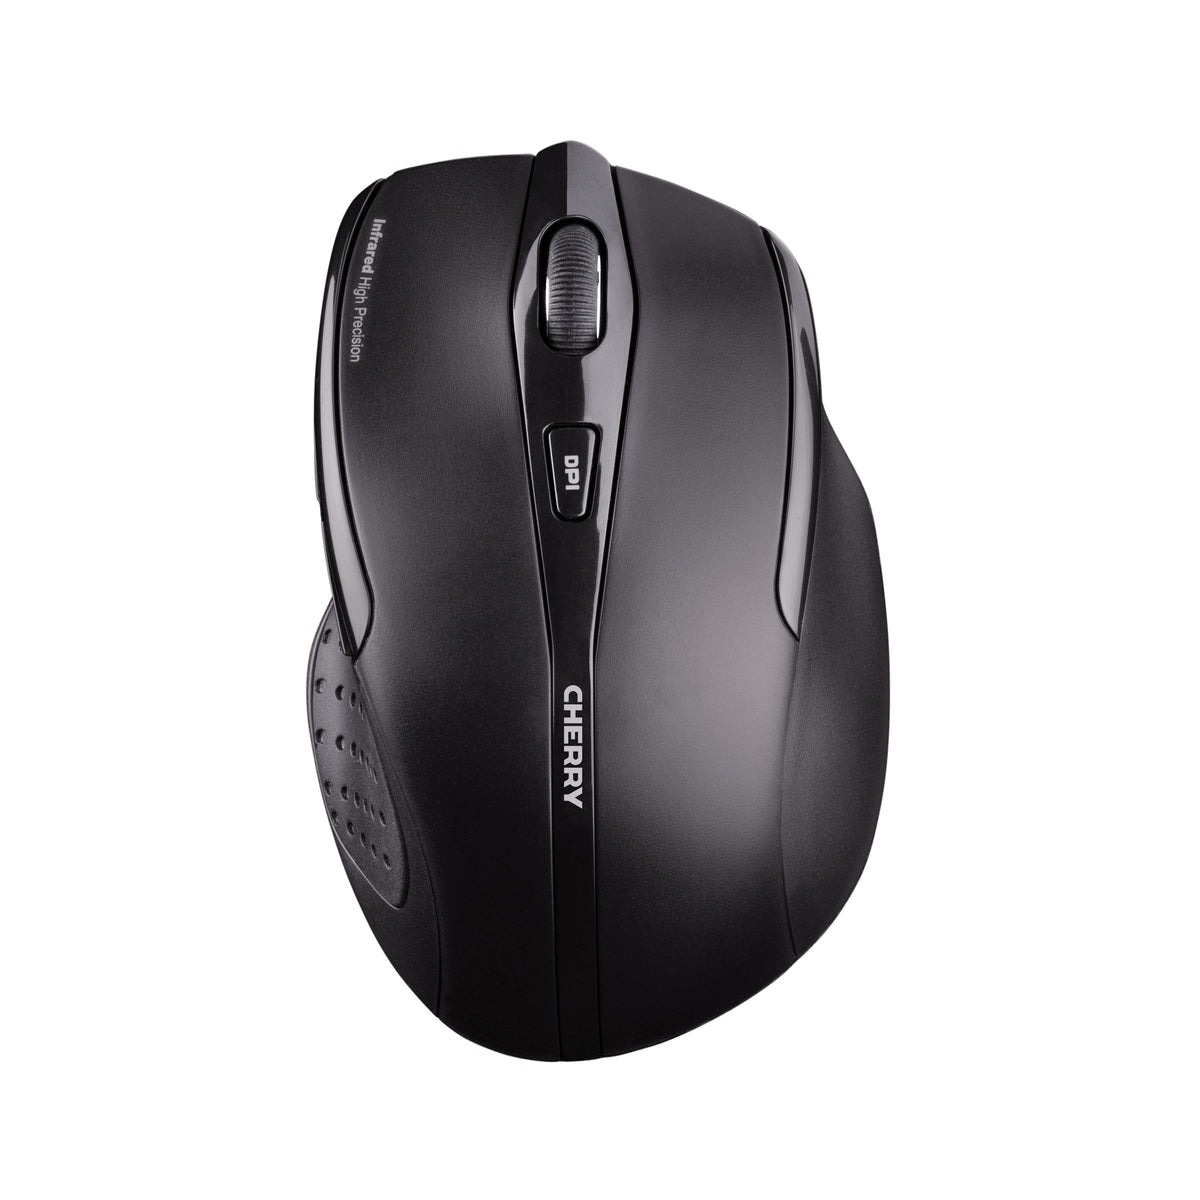 CHERRY MW 3000 - Mouse - right hand - infrared - 5 buttons - wireless - 2.4 GHz - USB wireless receiver - black